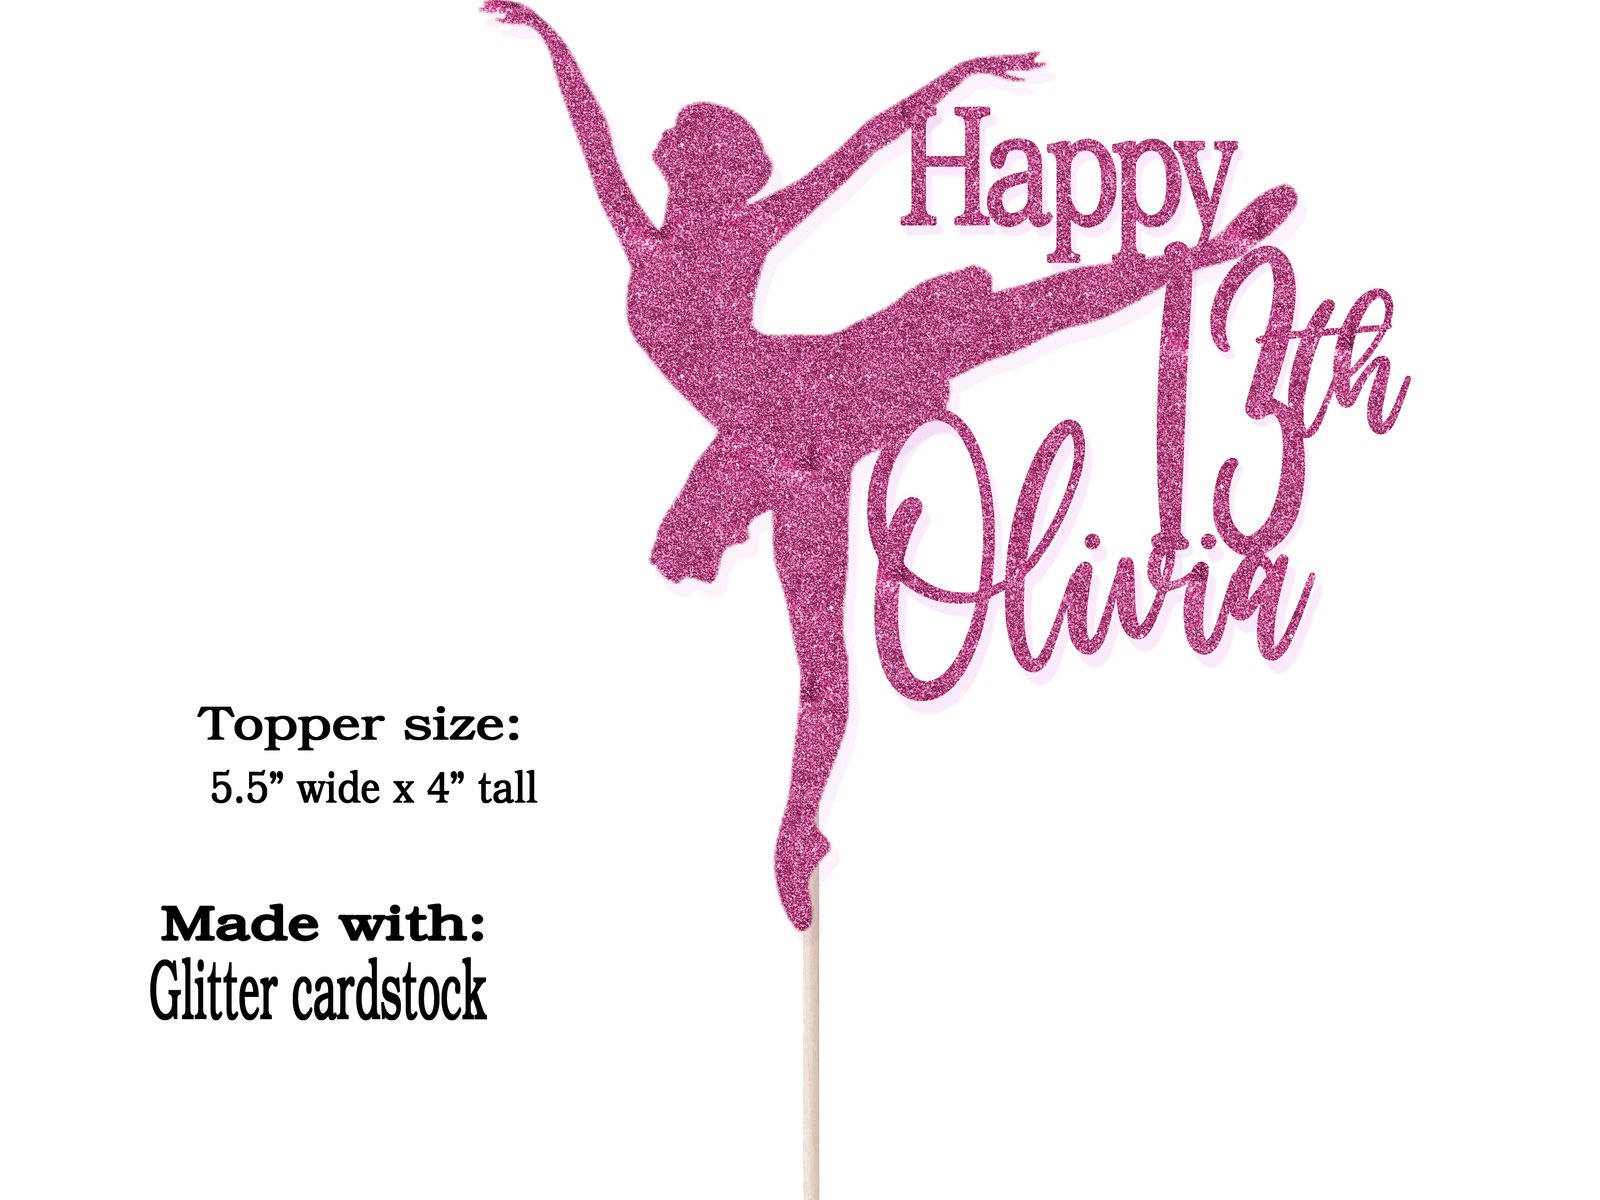 Details more than 87 ballerina cake topper nz latest - awesomeenglish.edu.vn